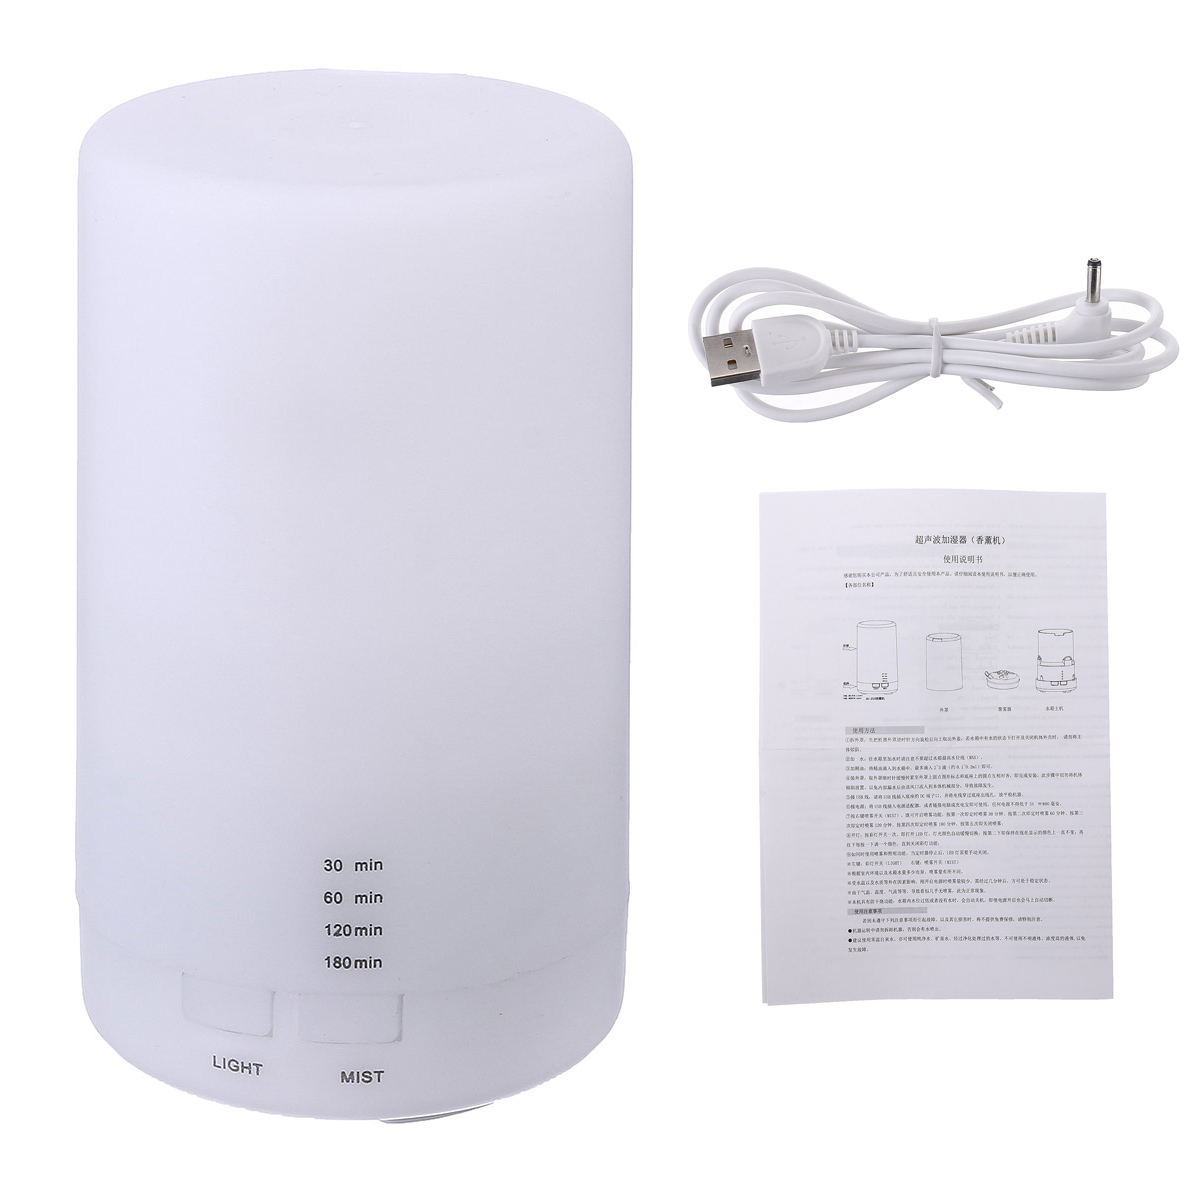 7-LED-Ultrasonic-Aroma-Essential-Diffuser-Air-Humidifier-Purifier-Aromatherapy-Timing-Function-1605103-9